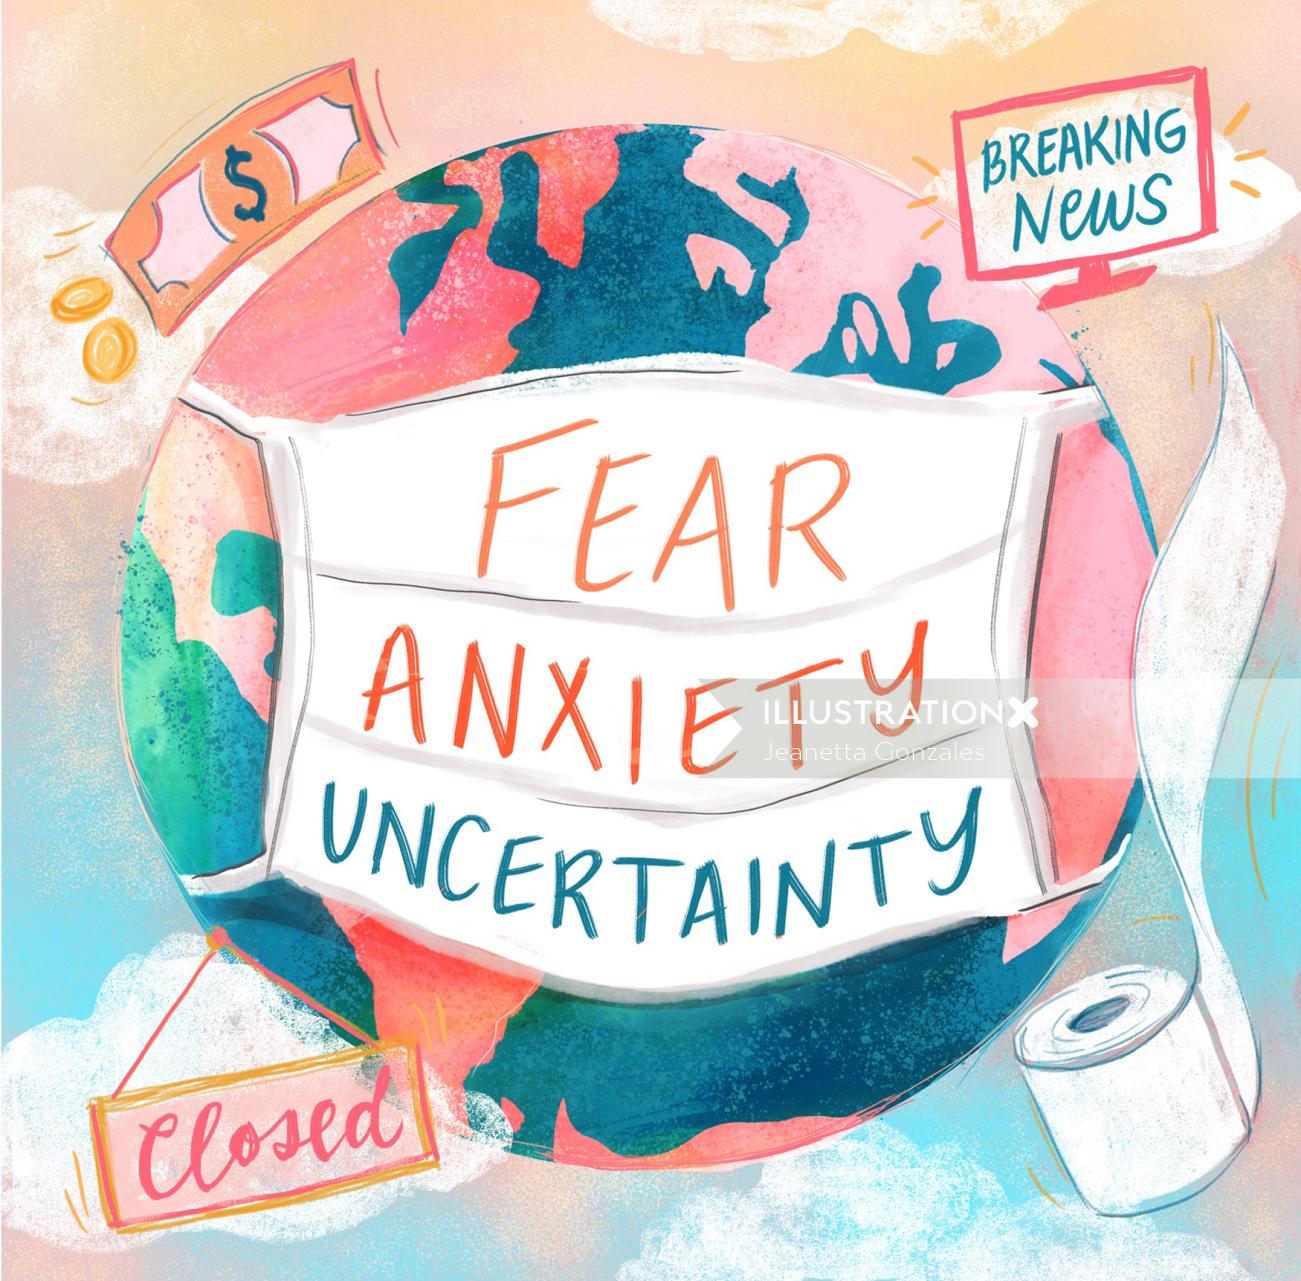 Graphic Fear Anxiety uncertainty